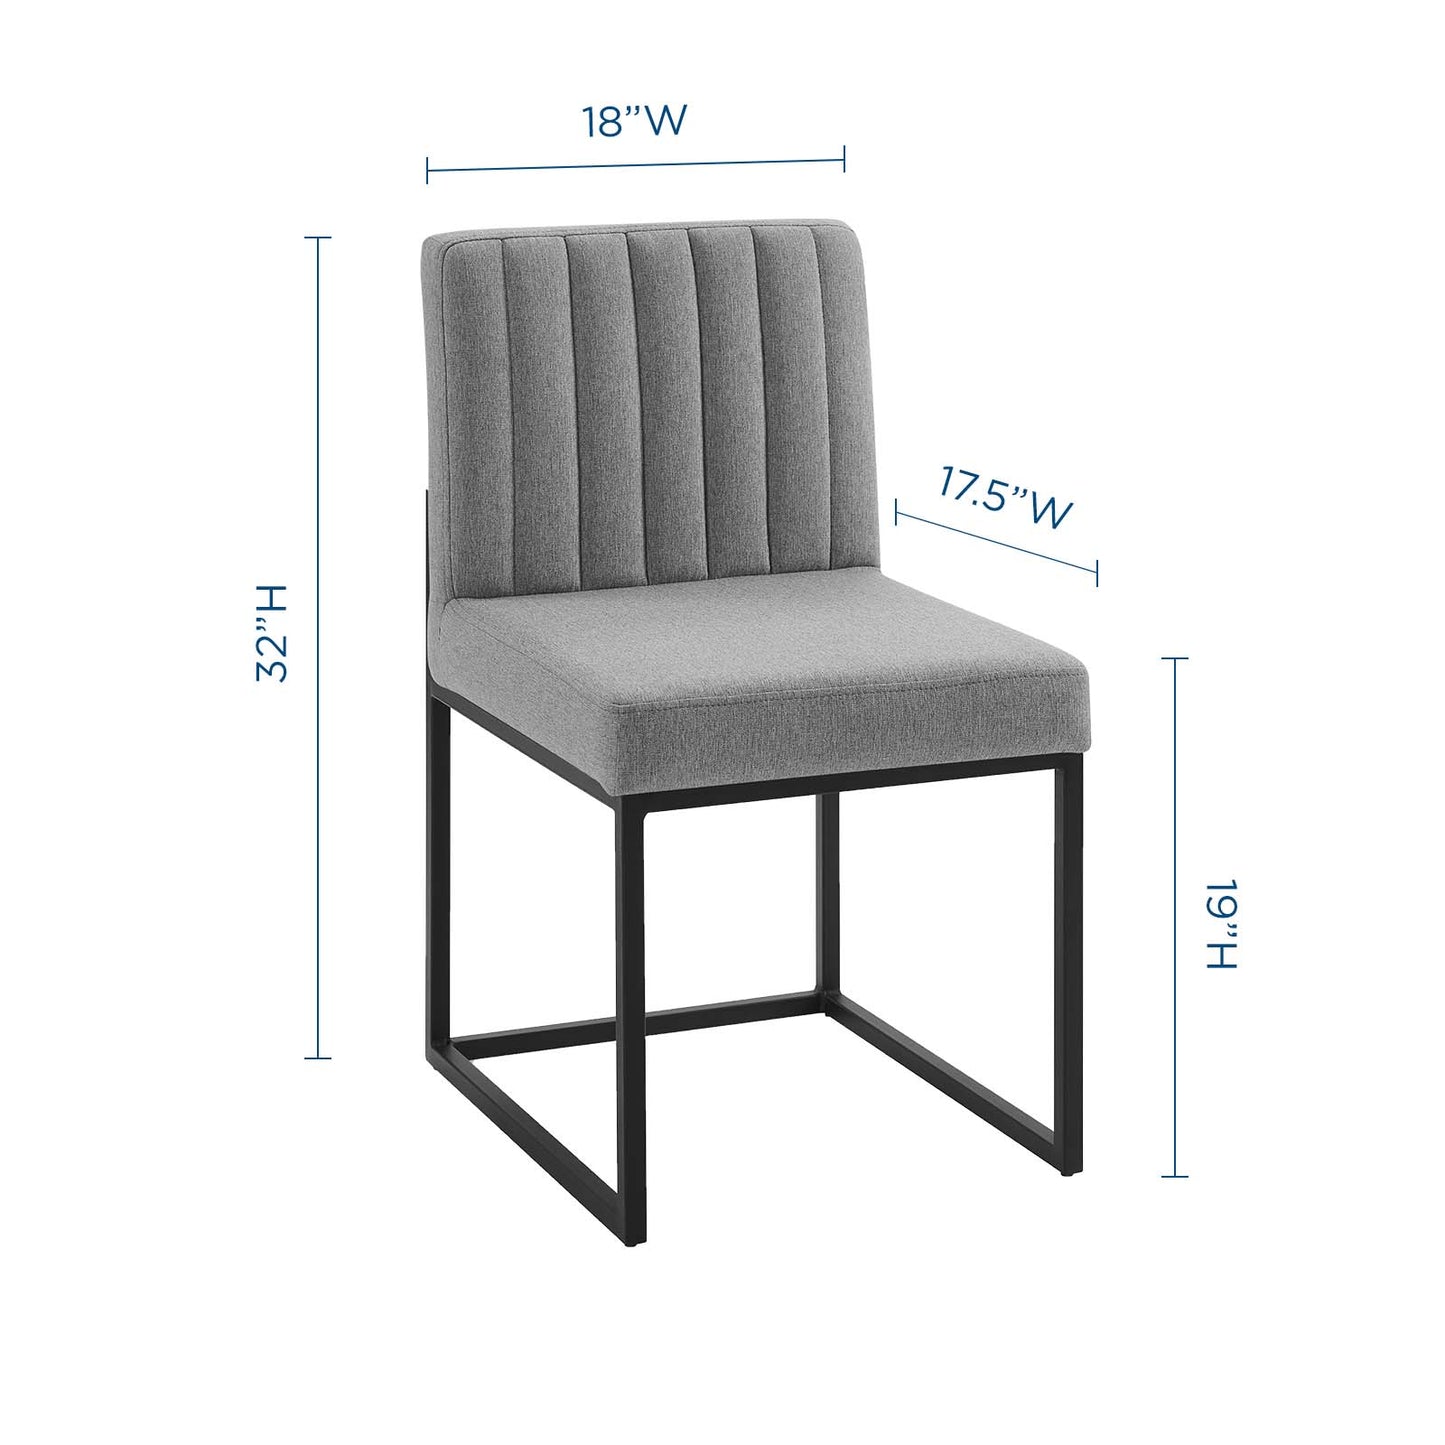 Carriage Channel Tufted Sled Base Upholstered Fabric Dining Chair Black Light Gray EEI-3807-BLK-LGR